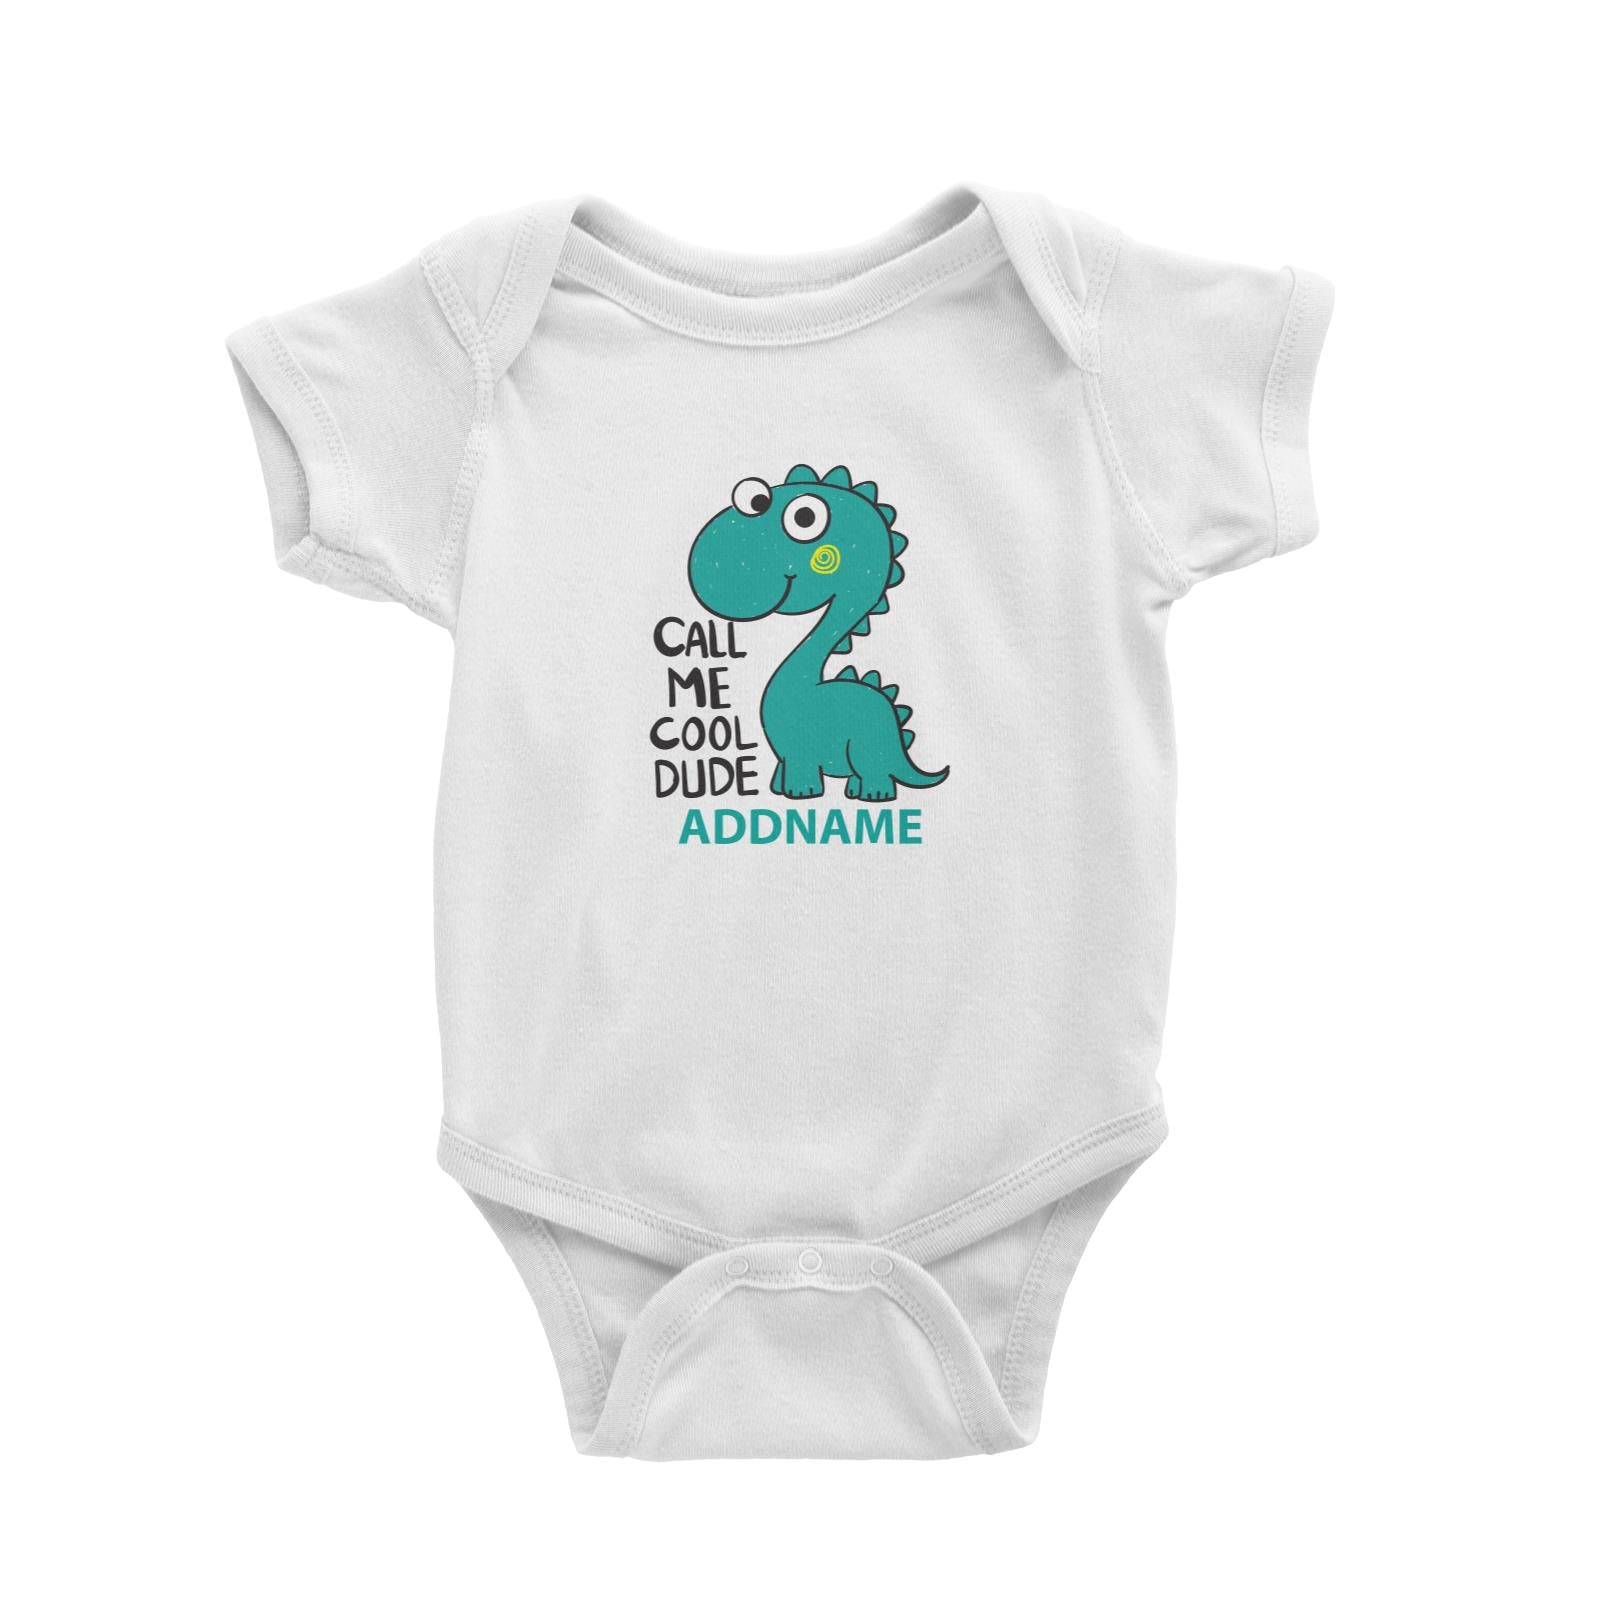 Cool Cute Dinosaur Call Me Cool Dude Addname Baby Romper